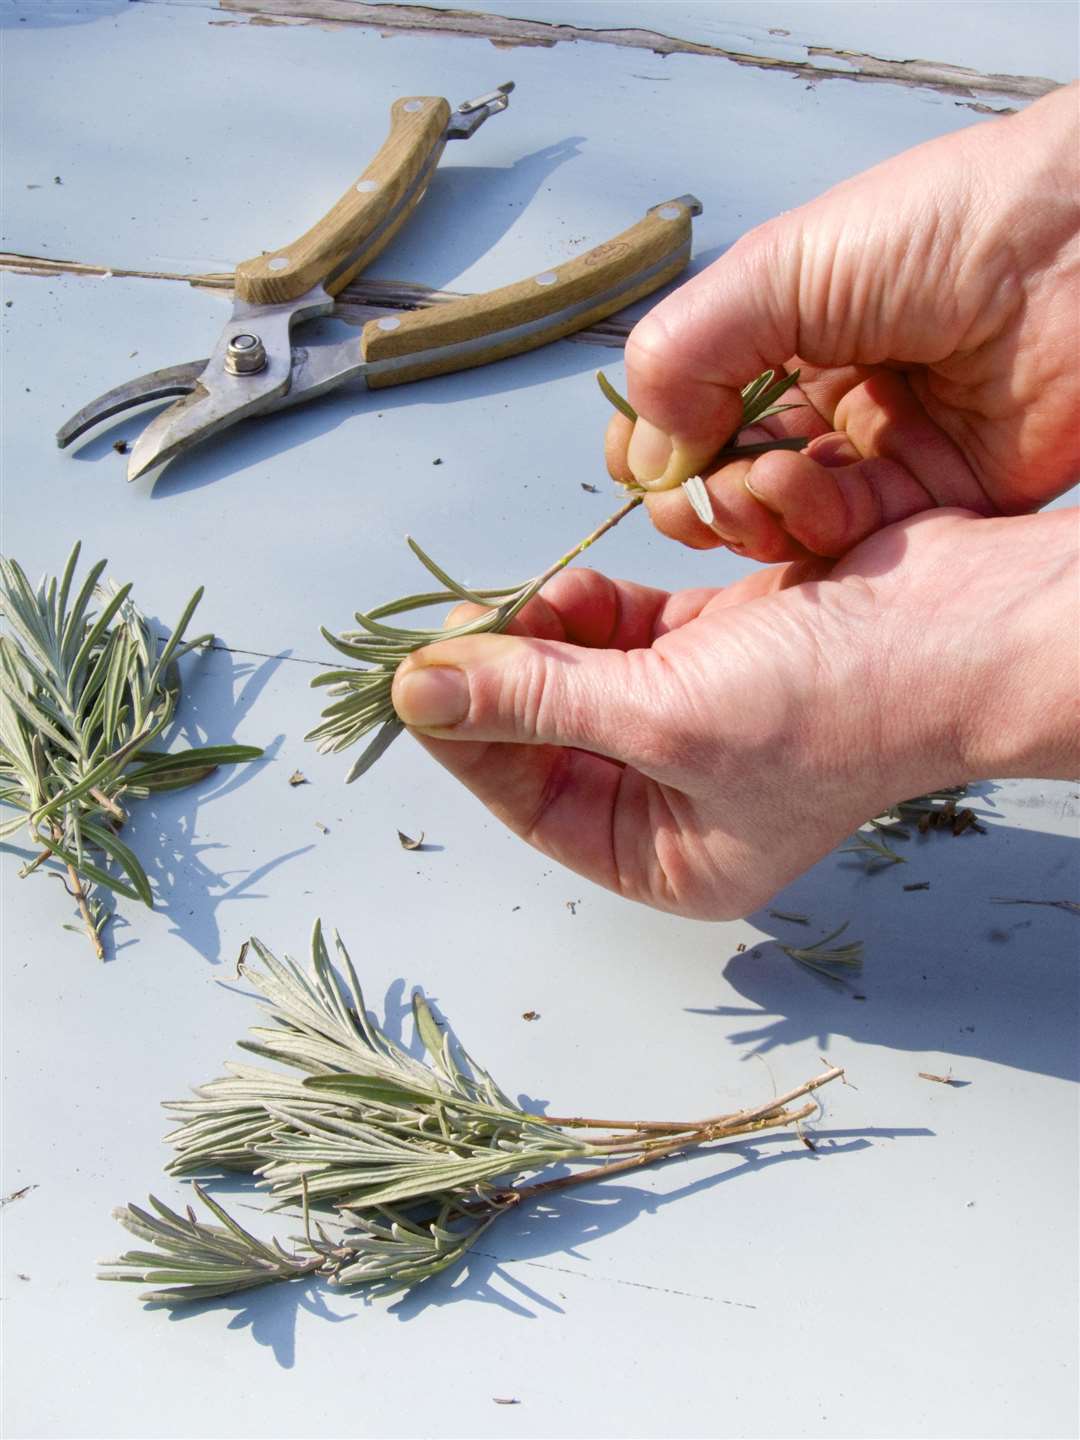 Take lavender cuttings to create new plants. Picture: iStock/PA